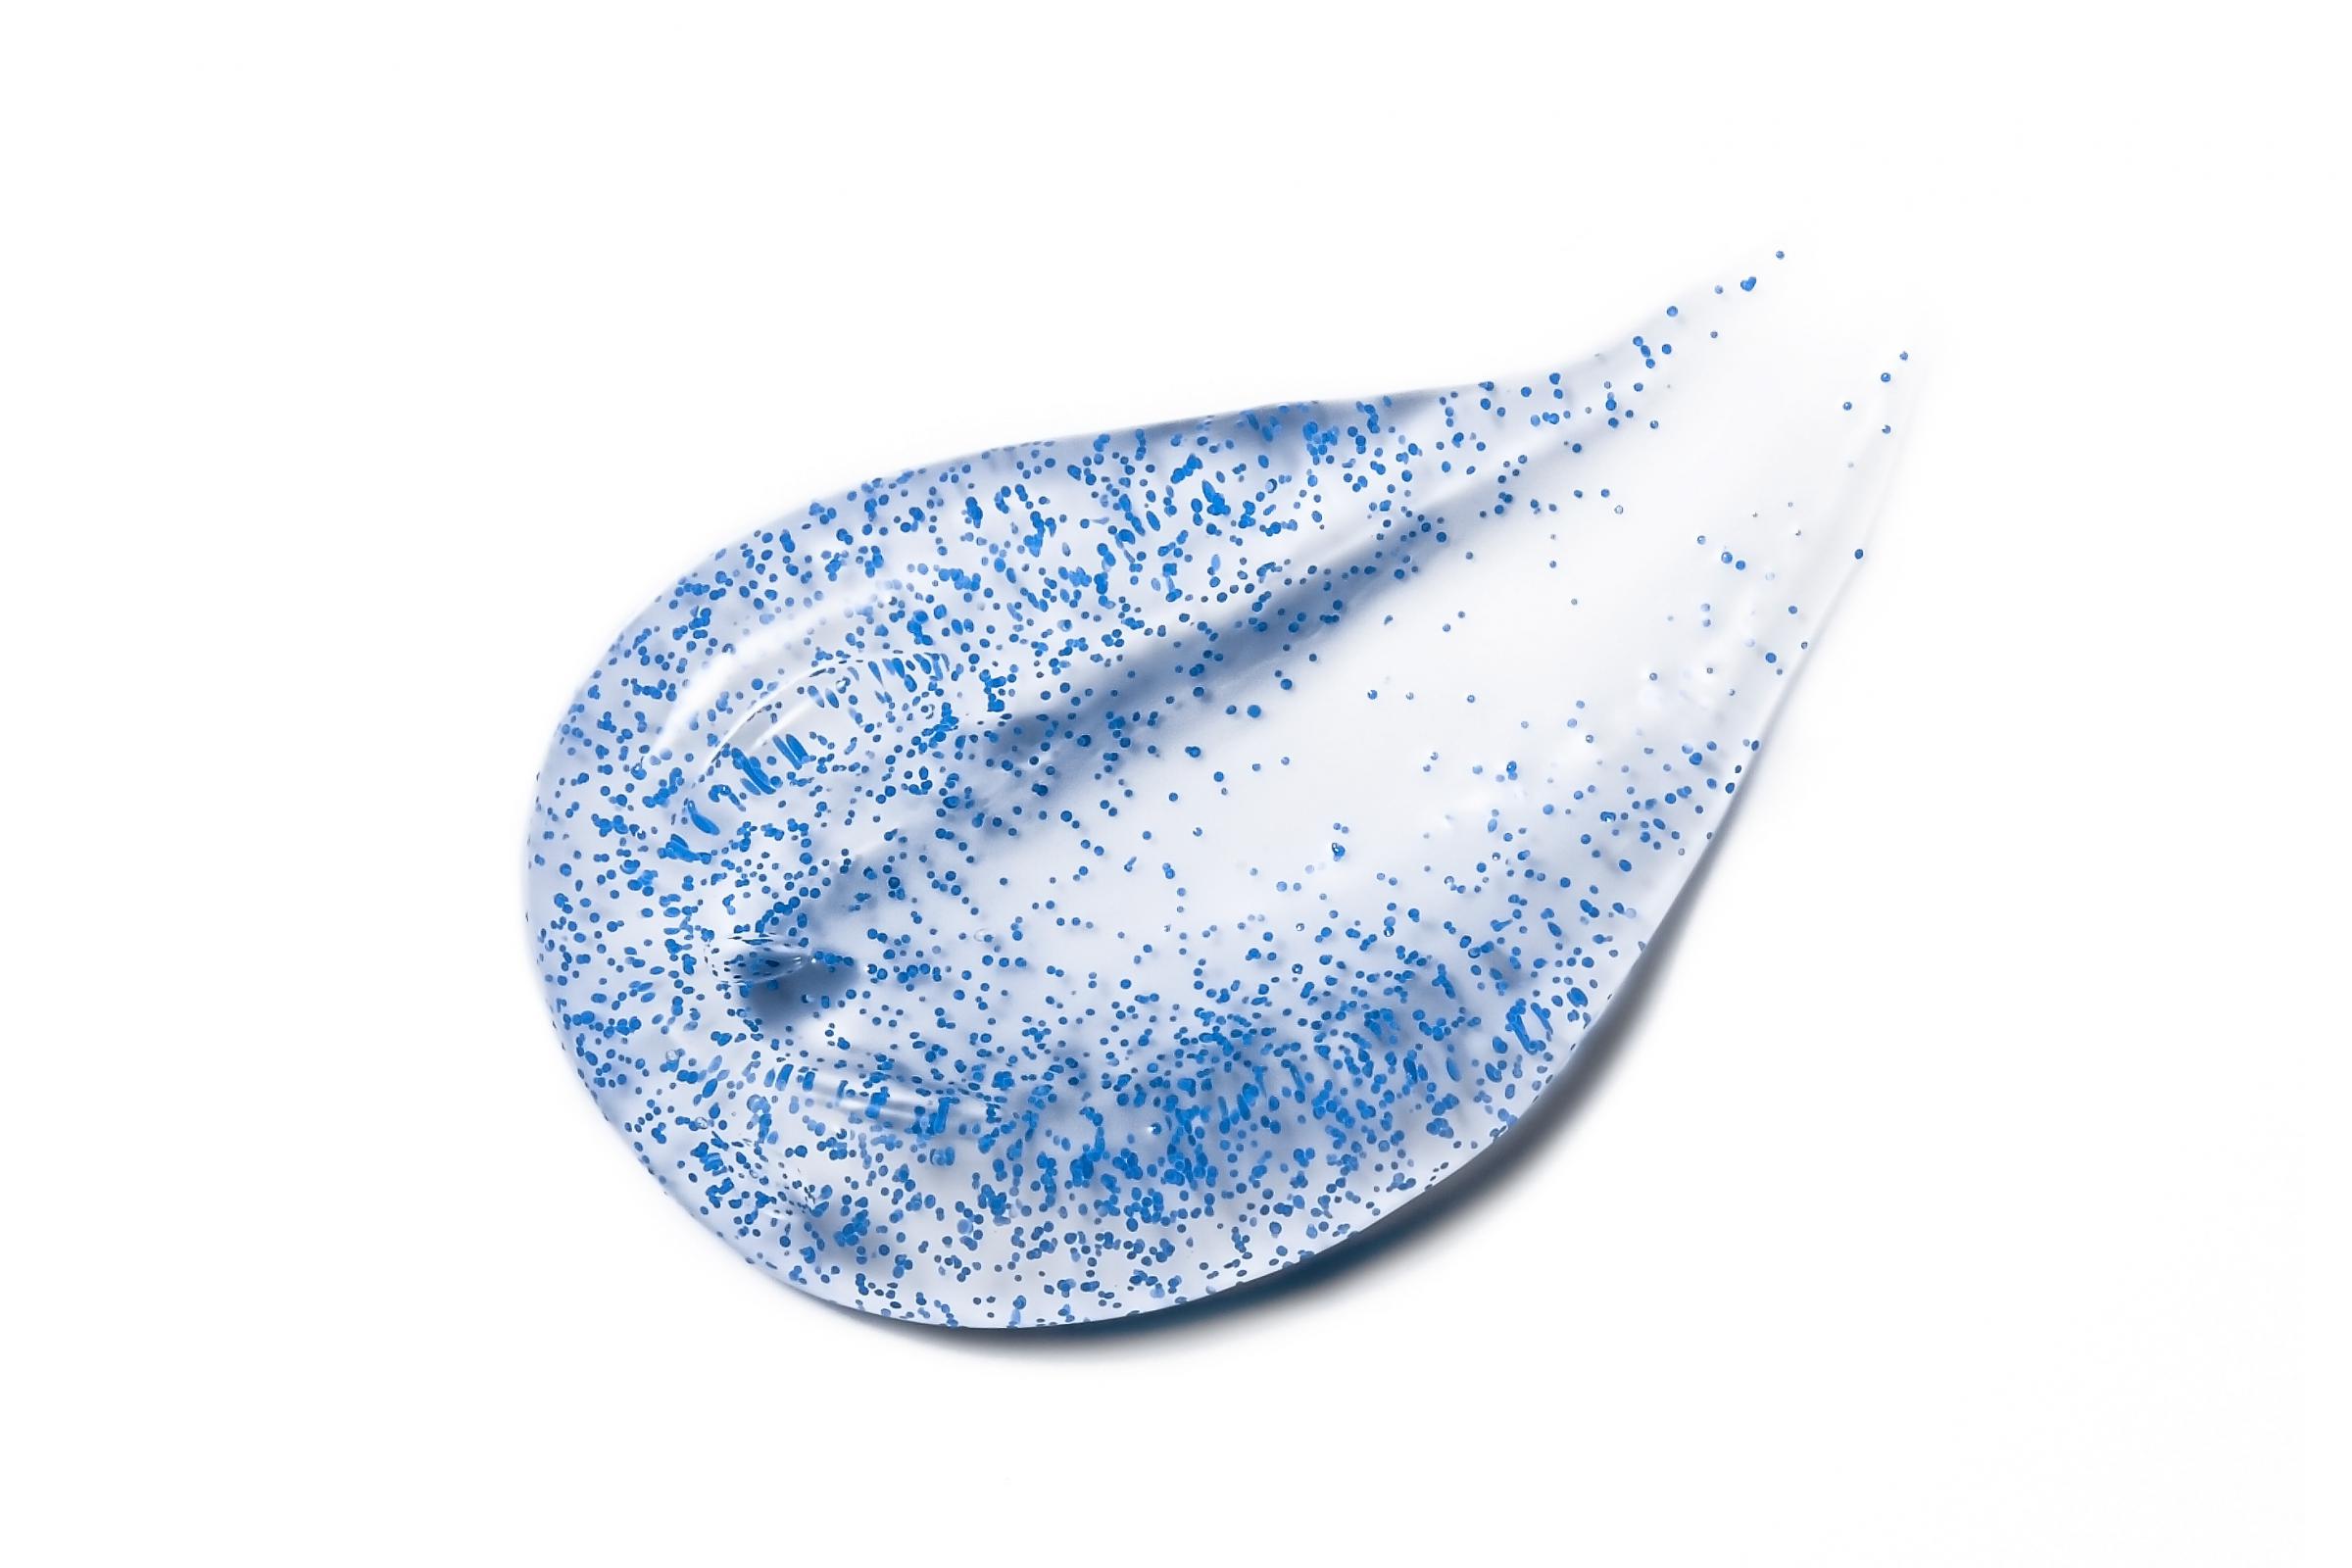 Guide Microplastics Check Products - the Microbead